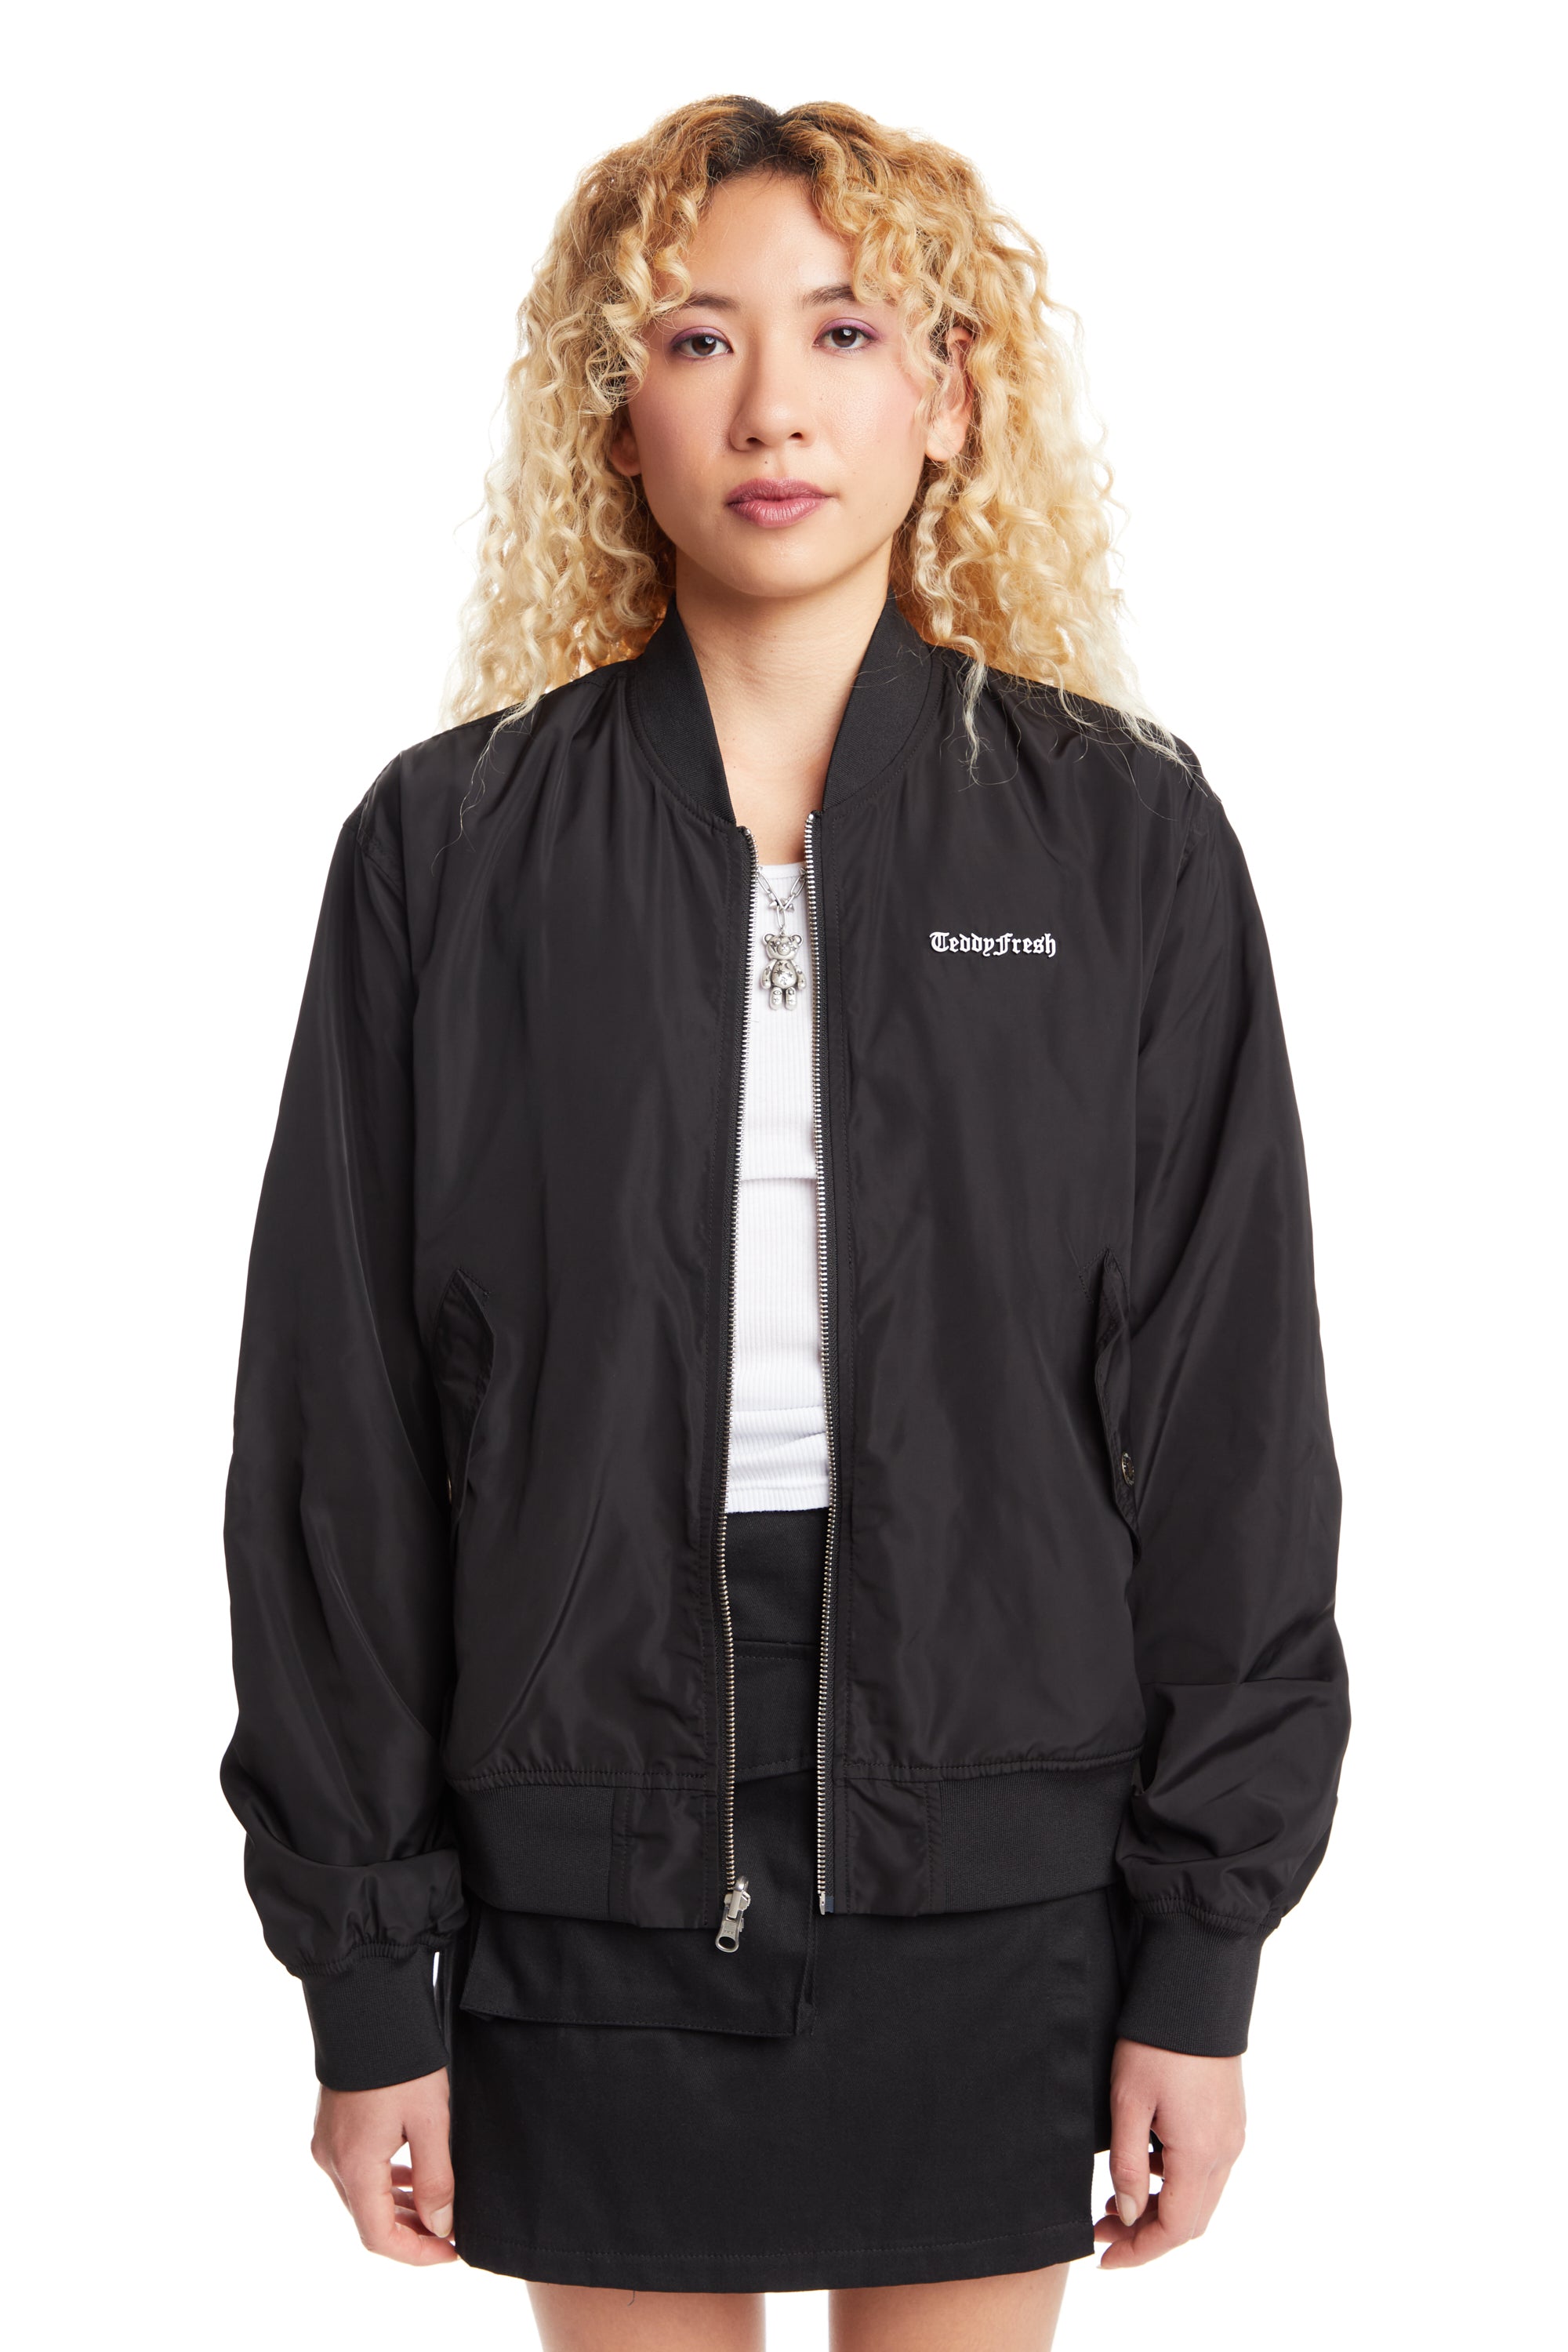 Teddy Fresh, Jackets & Coats, Teddy Fresh Womens Reversible Quilted  Jacket Iso